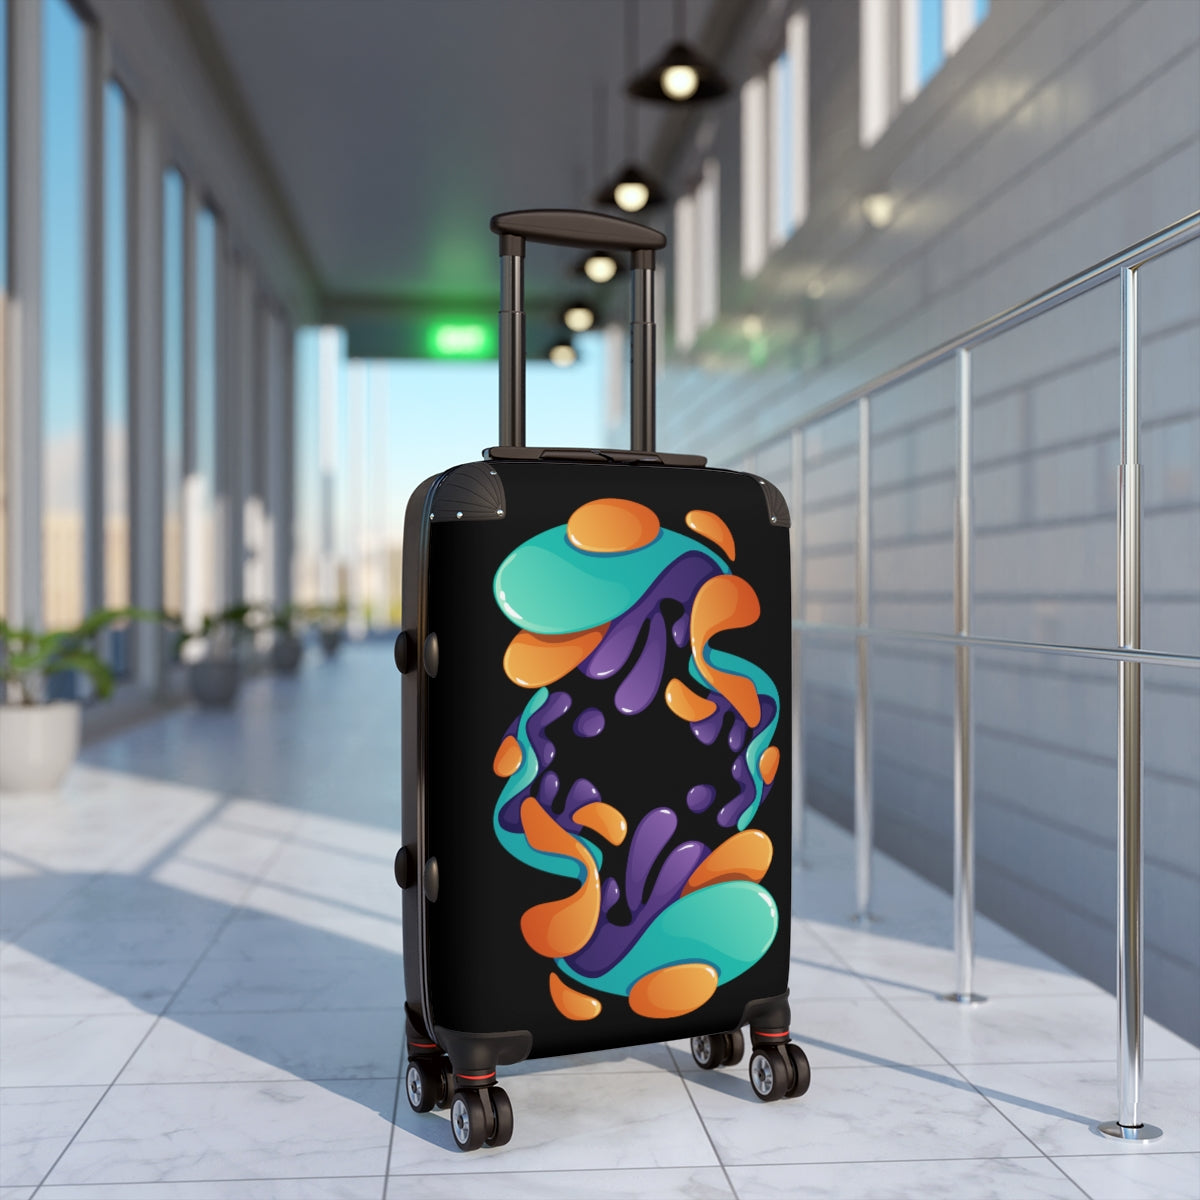 SUITCASES LUGGAGE by Artzira, All Sizes, Artistic Designs, Double Wheeled Spinner